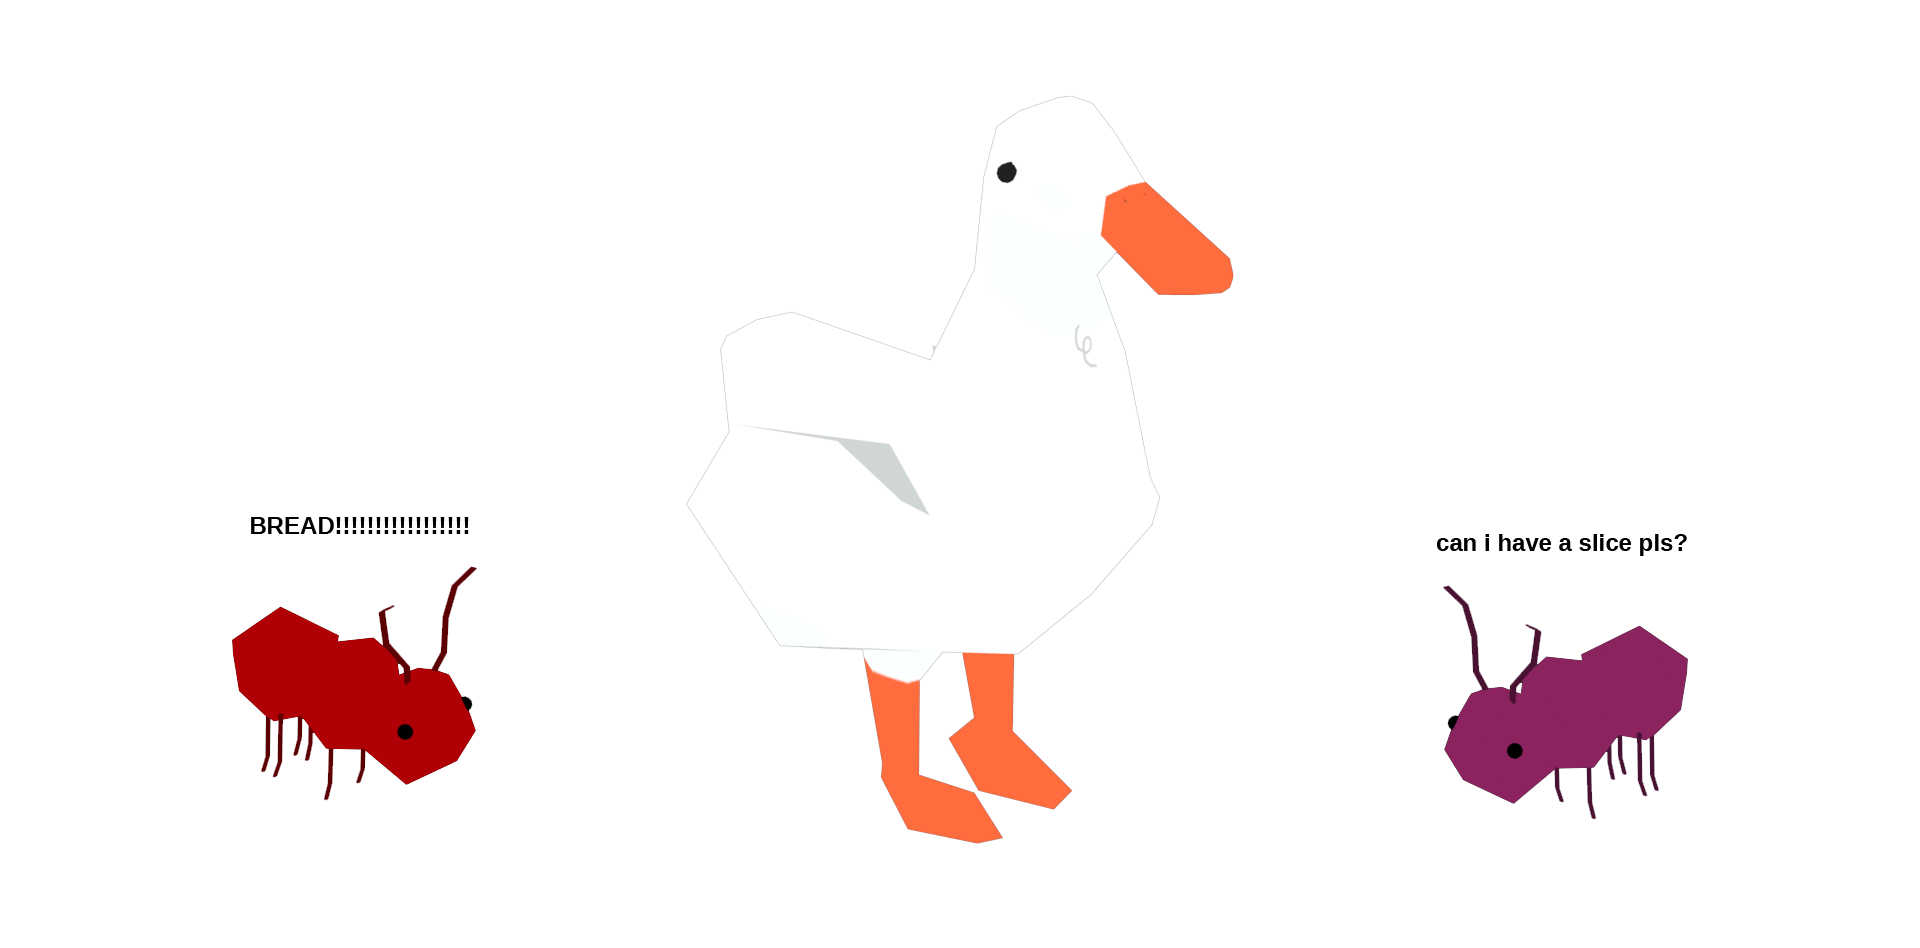 omg it's you but as a duck! 🦆